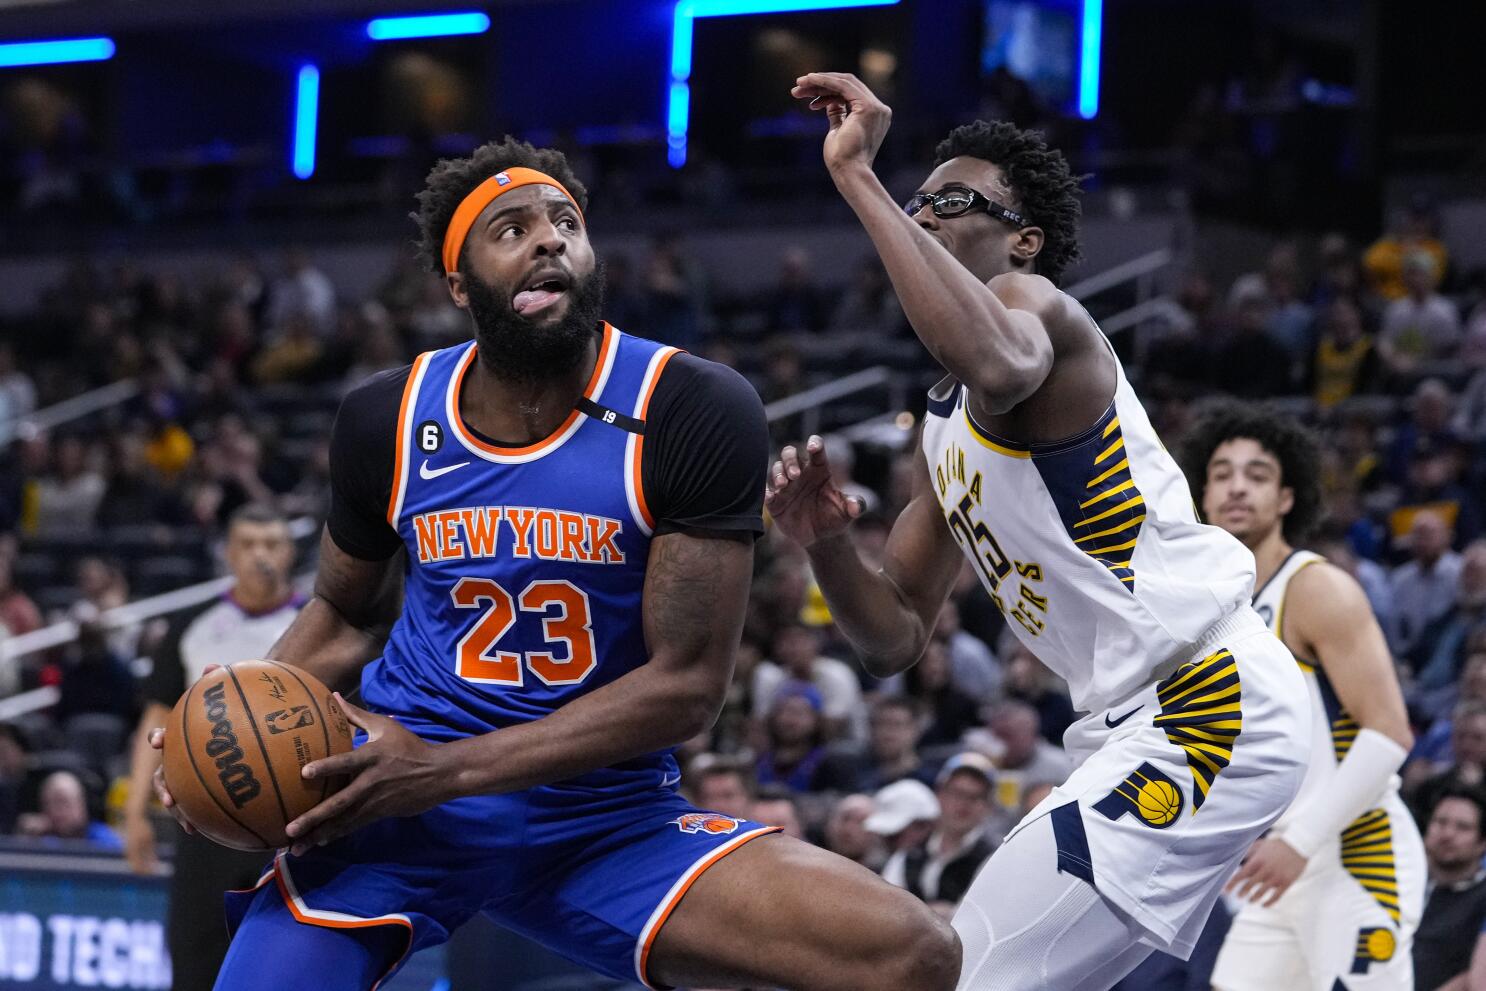 Quickley, Grimes lead Knicks past Pacers, 138-129 - The San Diego